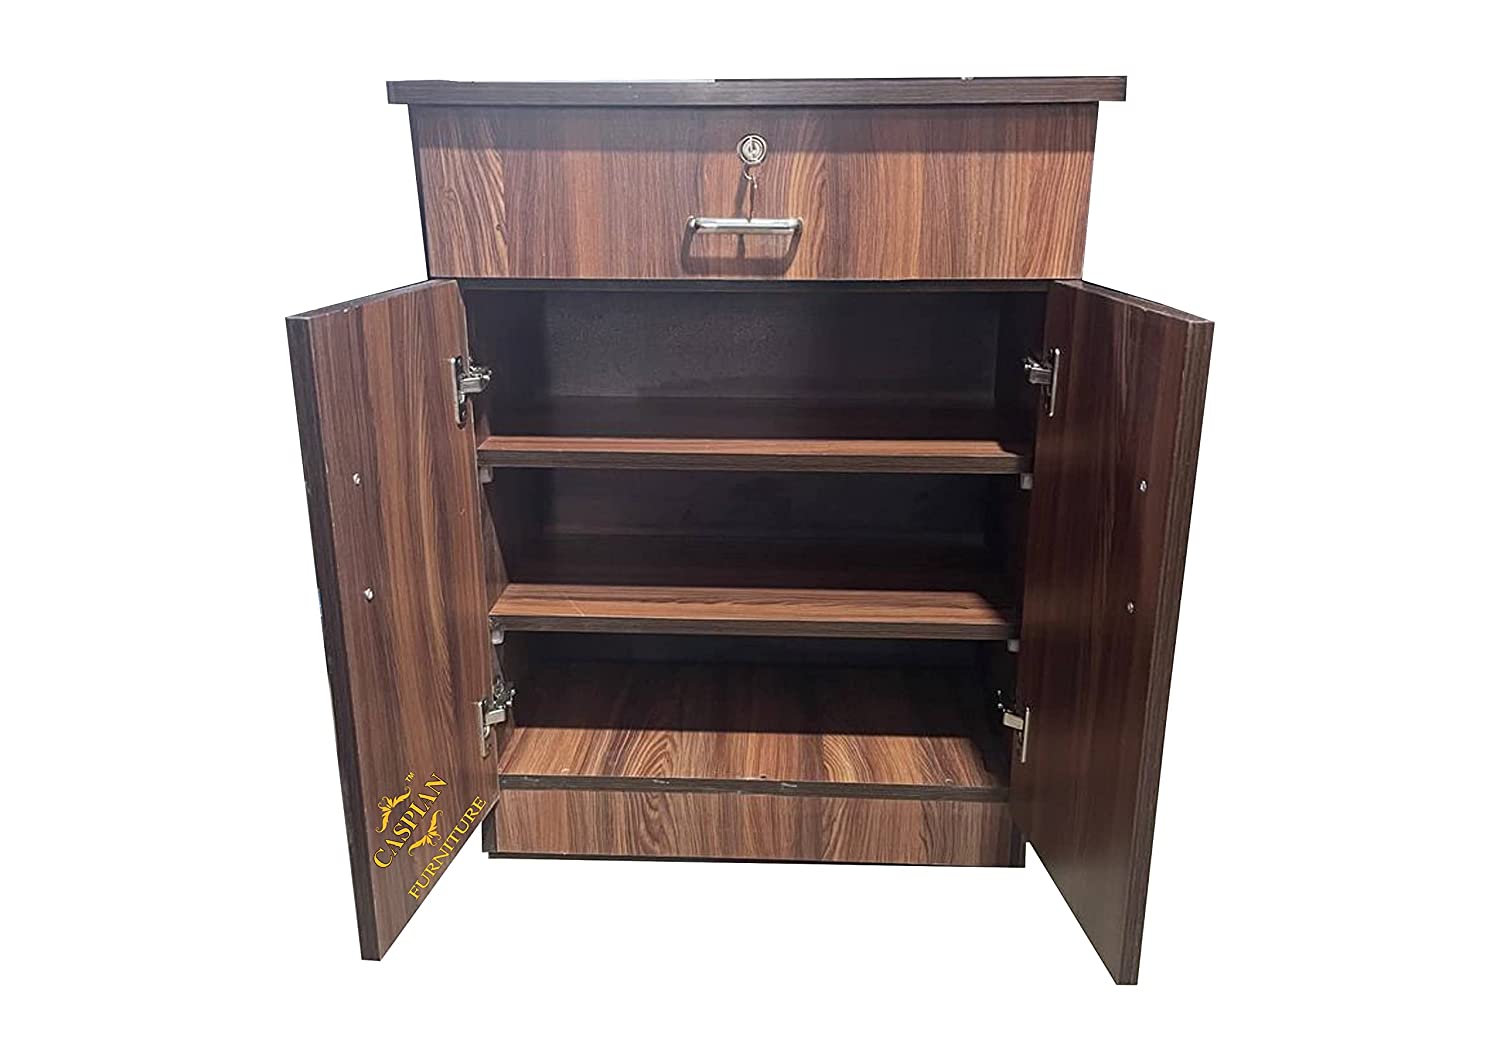 Engineered Wood 4 Tier Shelf in Streak Textured Finish | Shoe Cabinet | Hall Way Furniture | Outdoor Cabinet with Lock | Size 30 x 24 inches